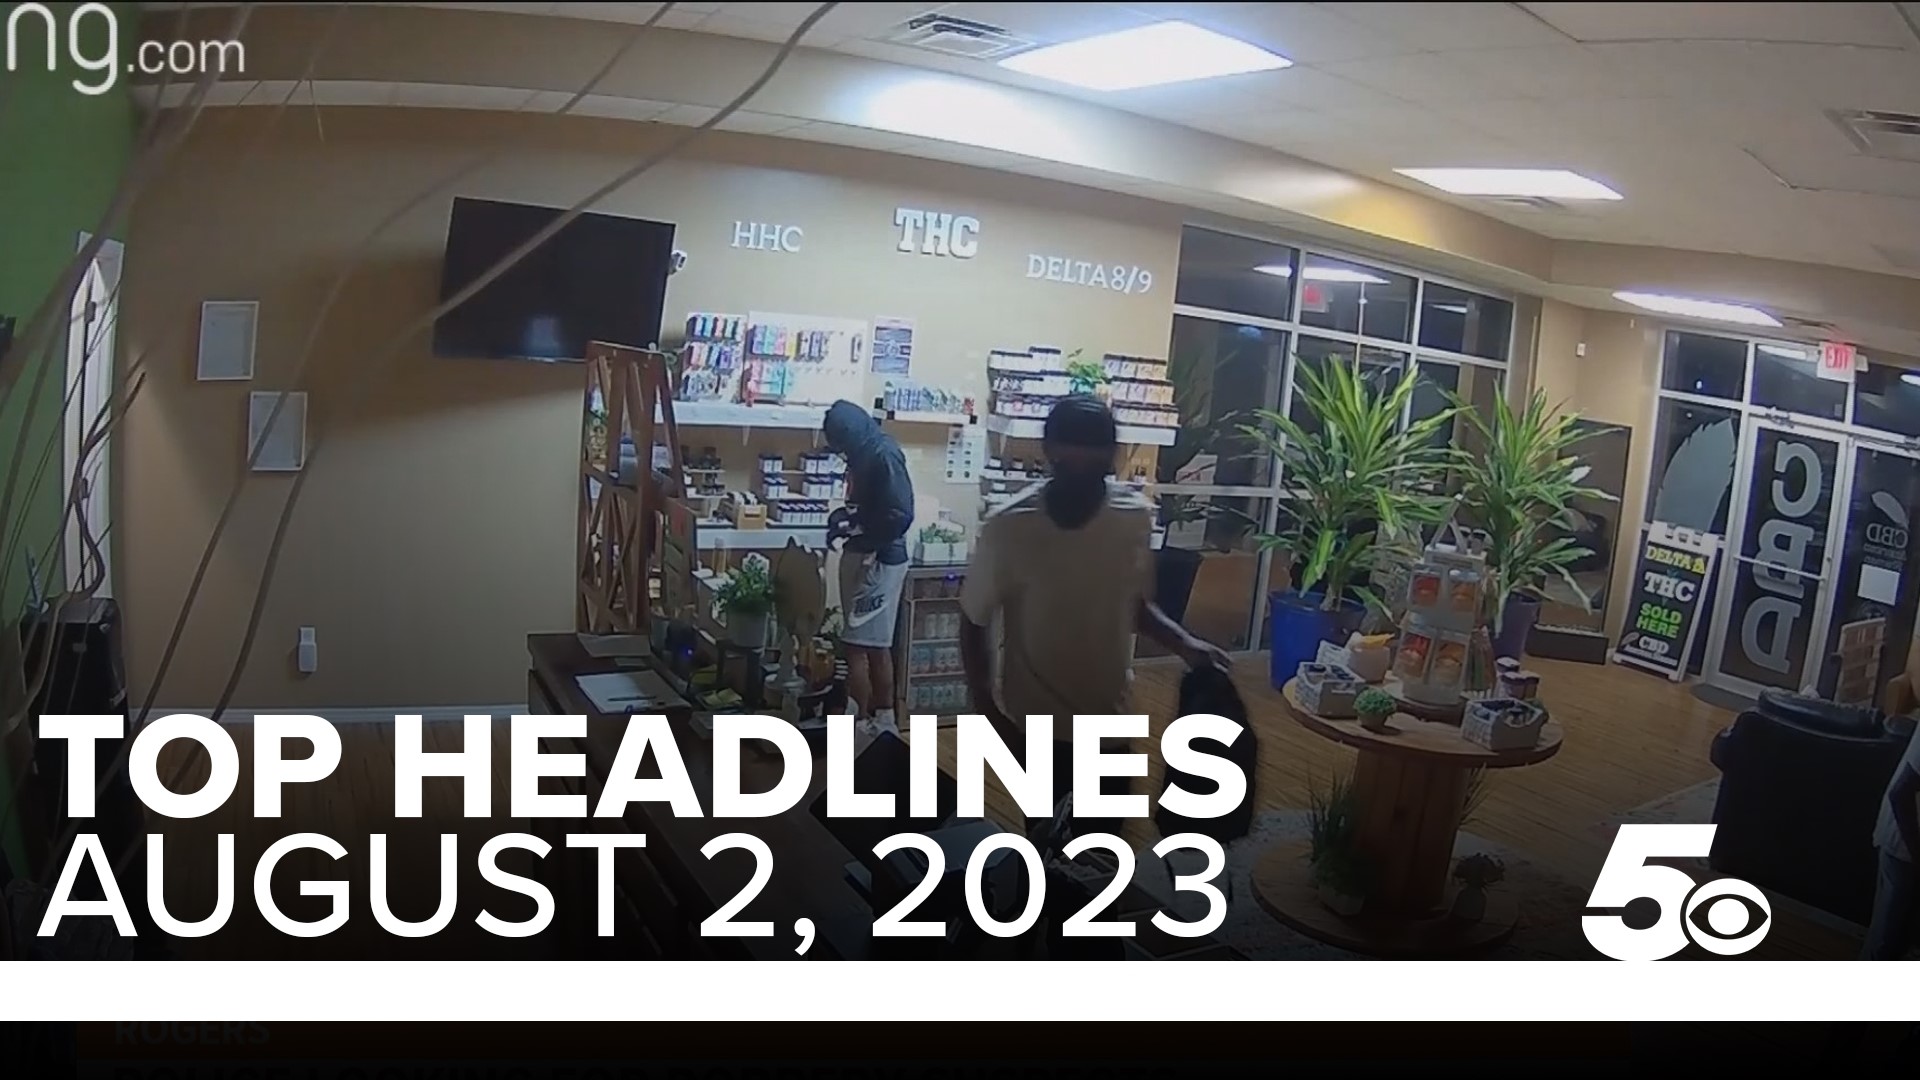 Top headlines for Northwest Arkansas and the River Valley on August 2, 2023.